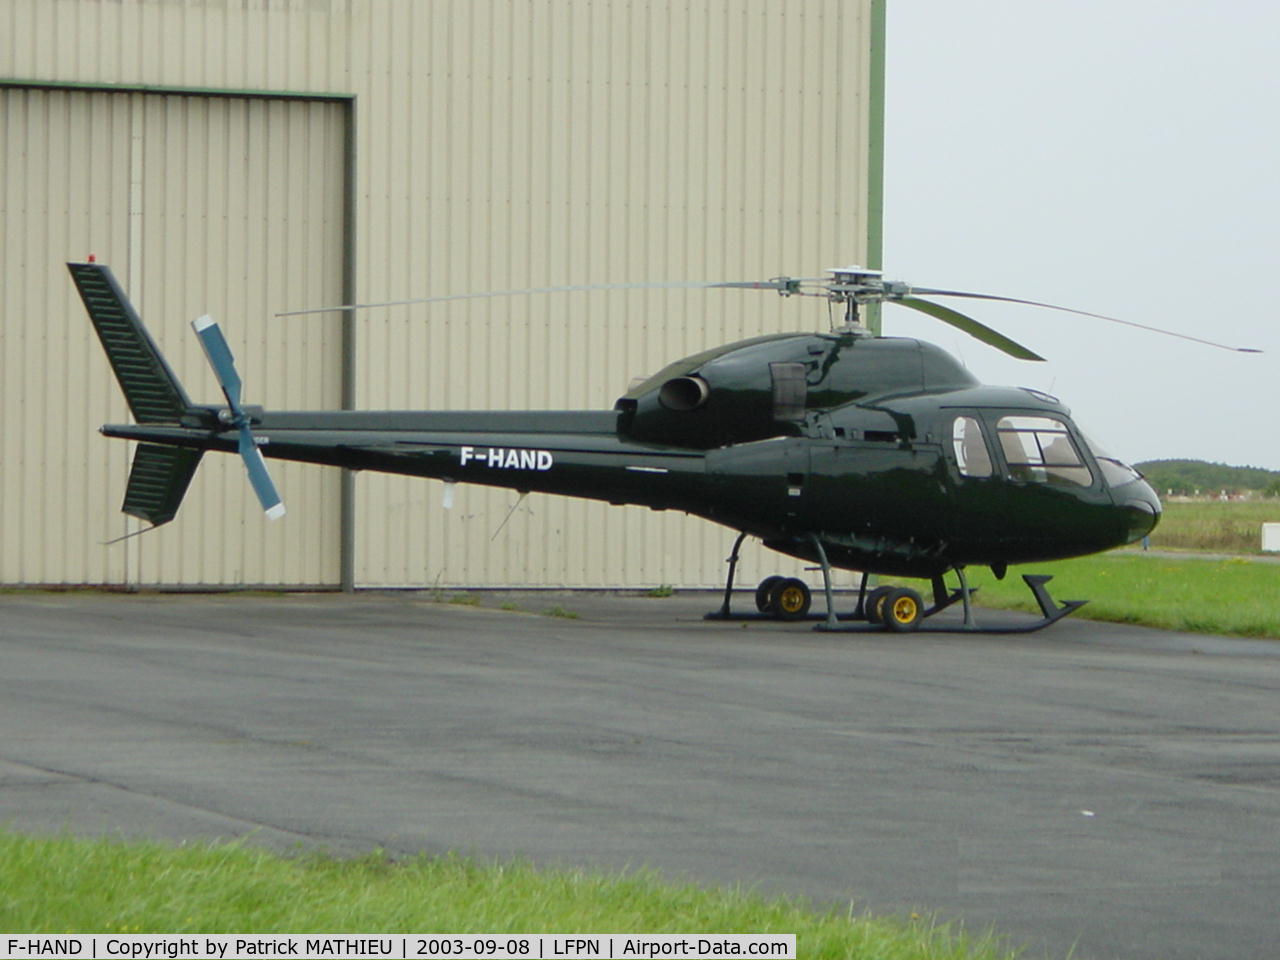 F-HAND, 1996 Eurocopter AS-355N Ecureuil 2 C/N 5621, in the front of Ixair